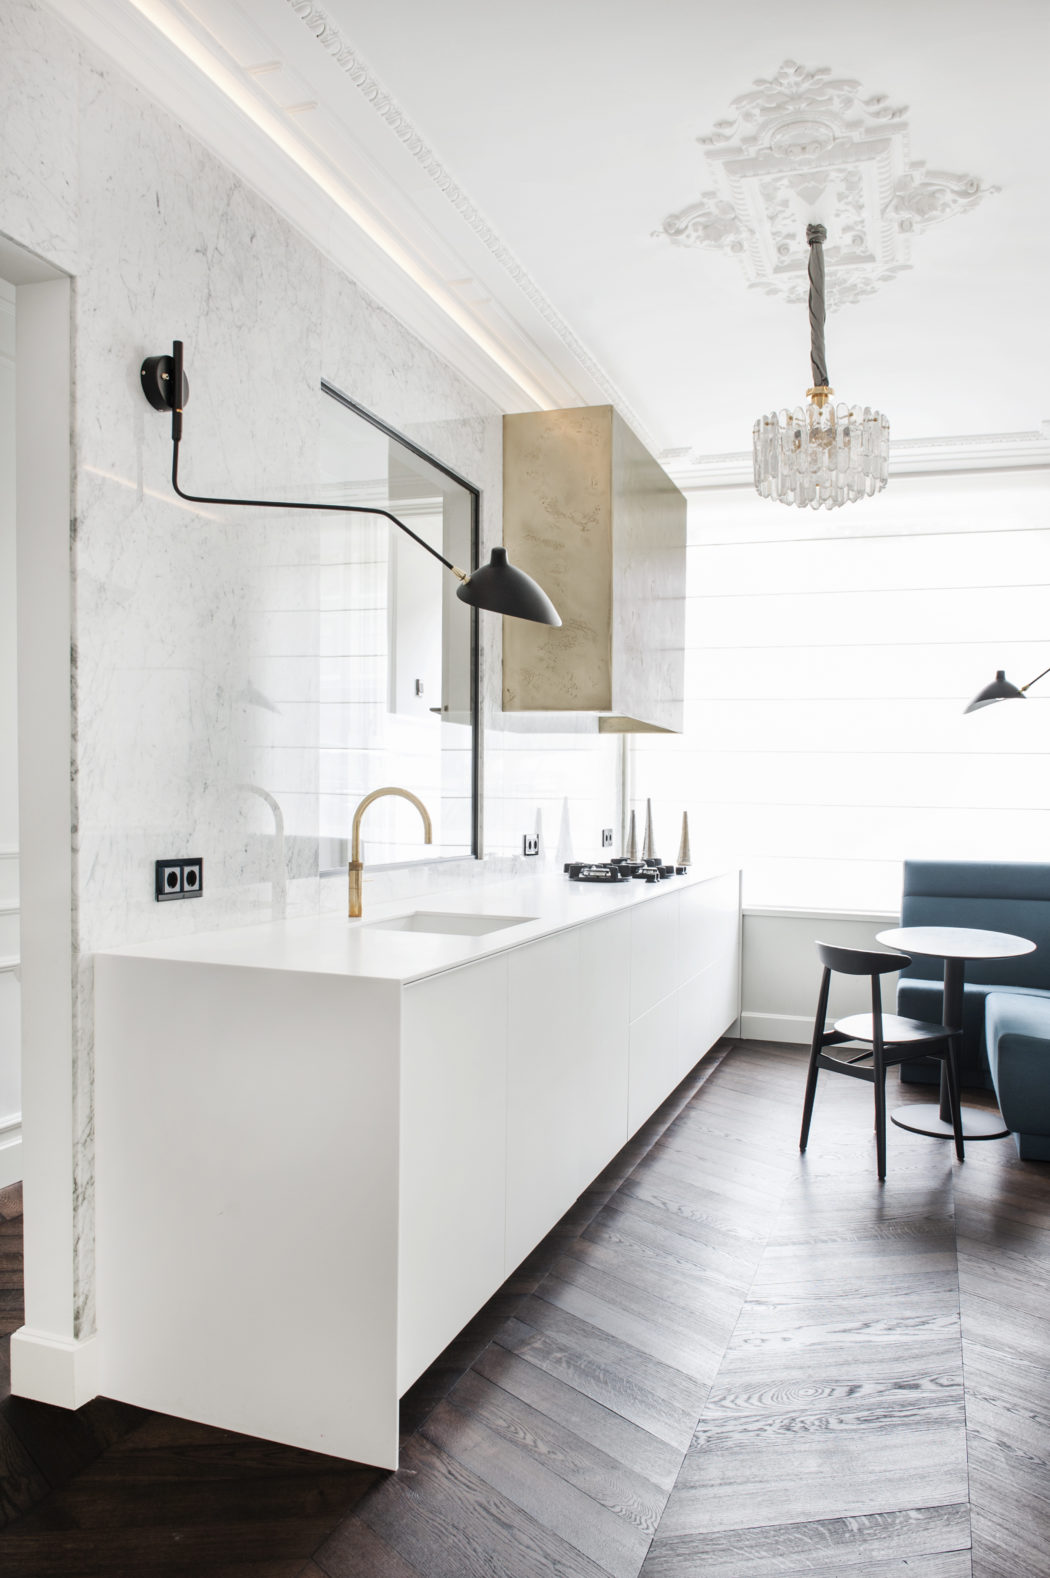 The kitchen is done with a marble backsplash, a white cabinet, a hanging metallic one and a bold glam chandelier